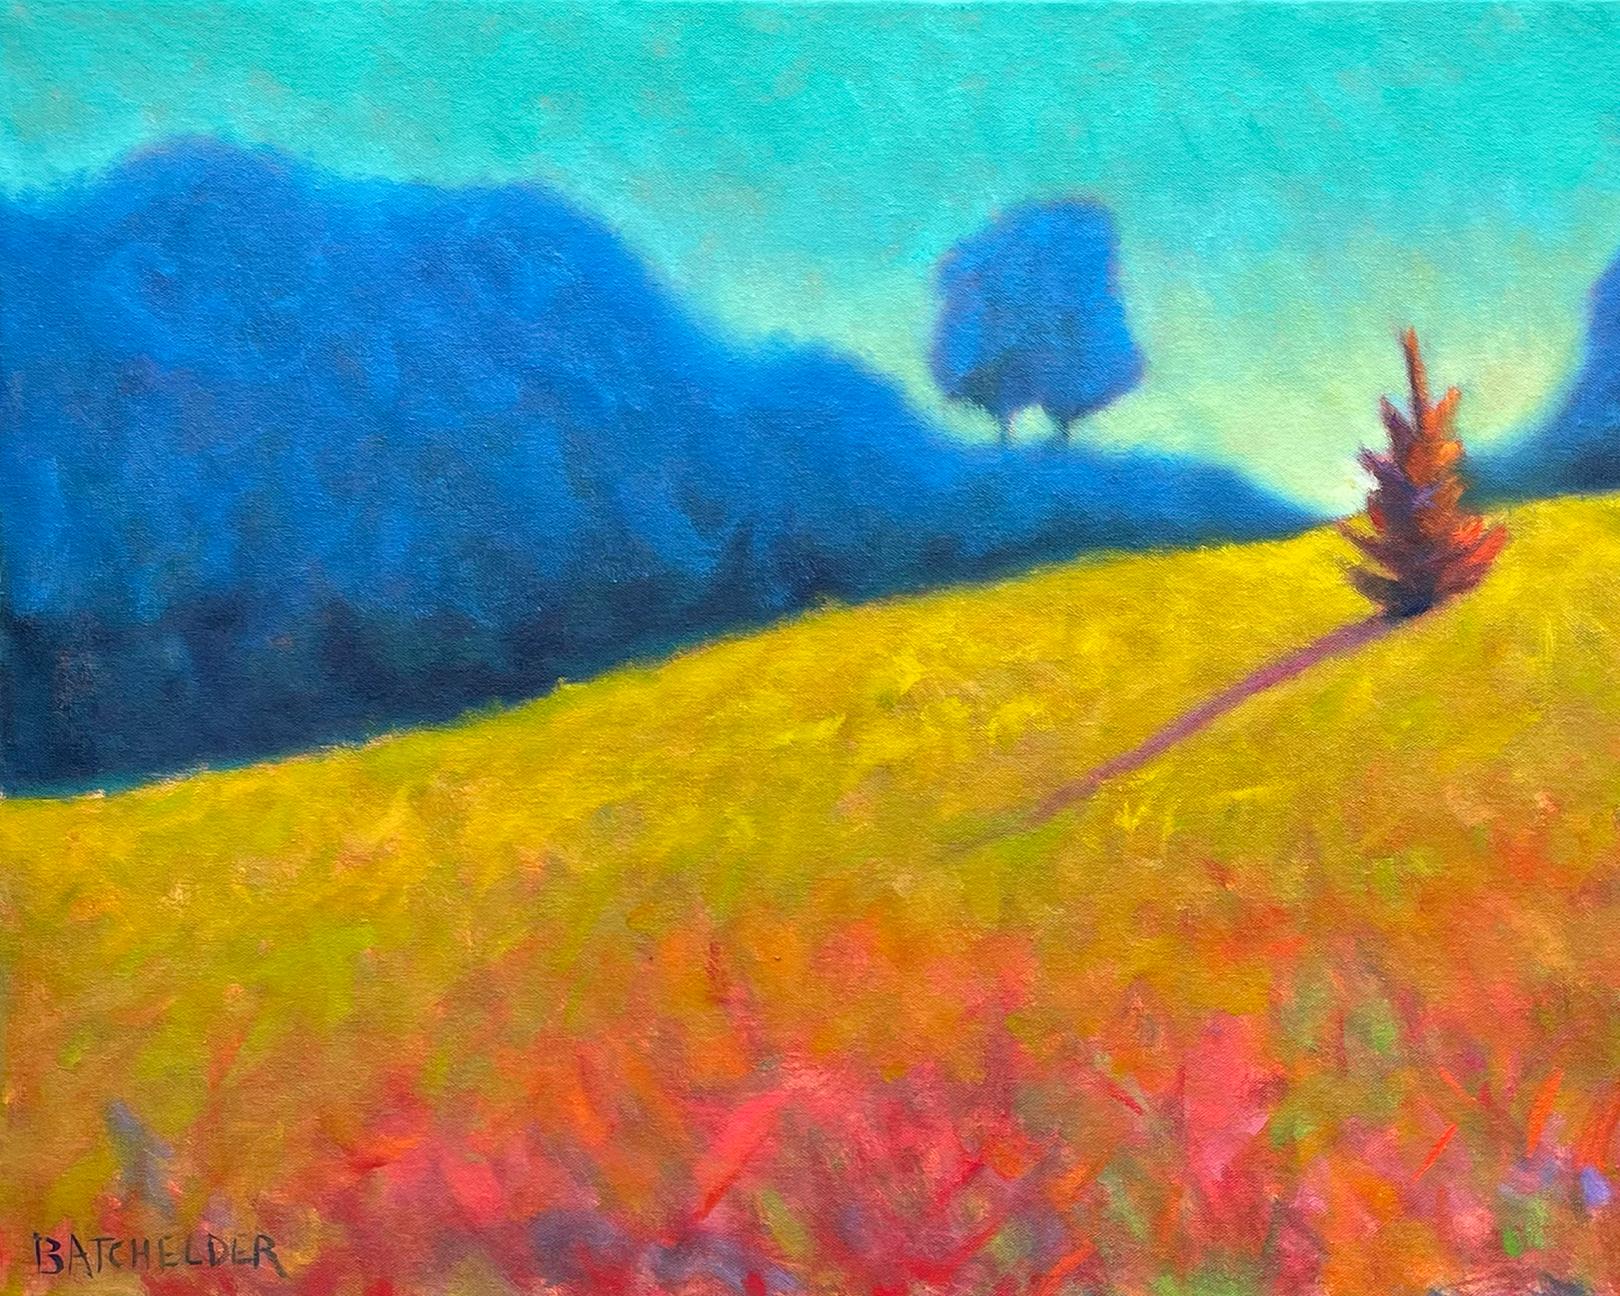 Upland Fir  is a framed oil on canvas painting  by artist Peter Batchelder.   It is 30